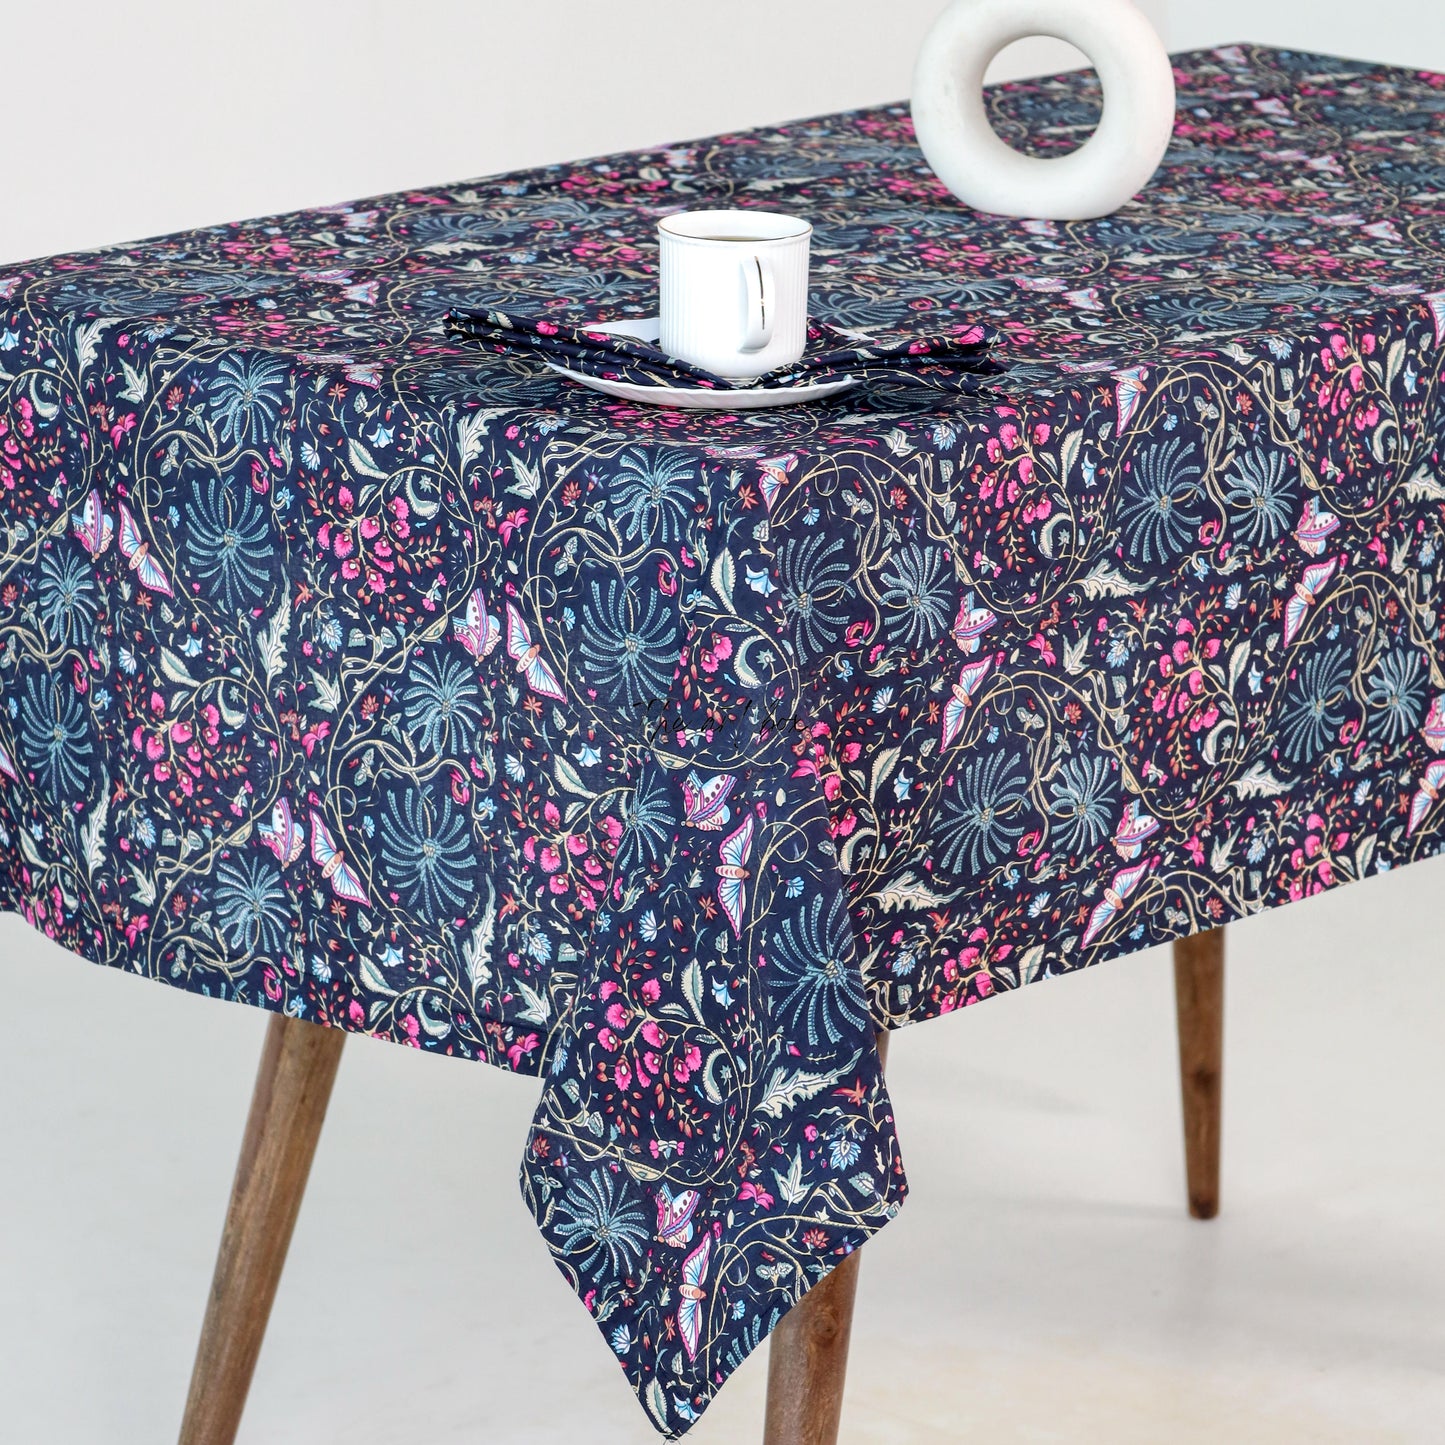 Floral Fantasy Transform Your Table with Black & Blue Printed Cotton Tablecloths